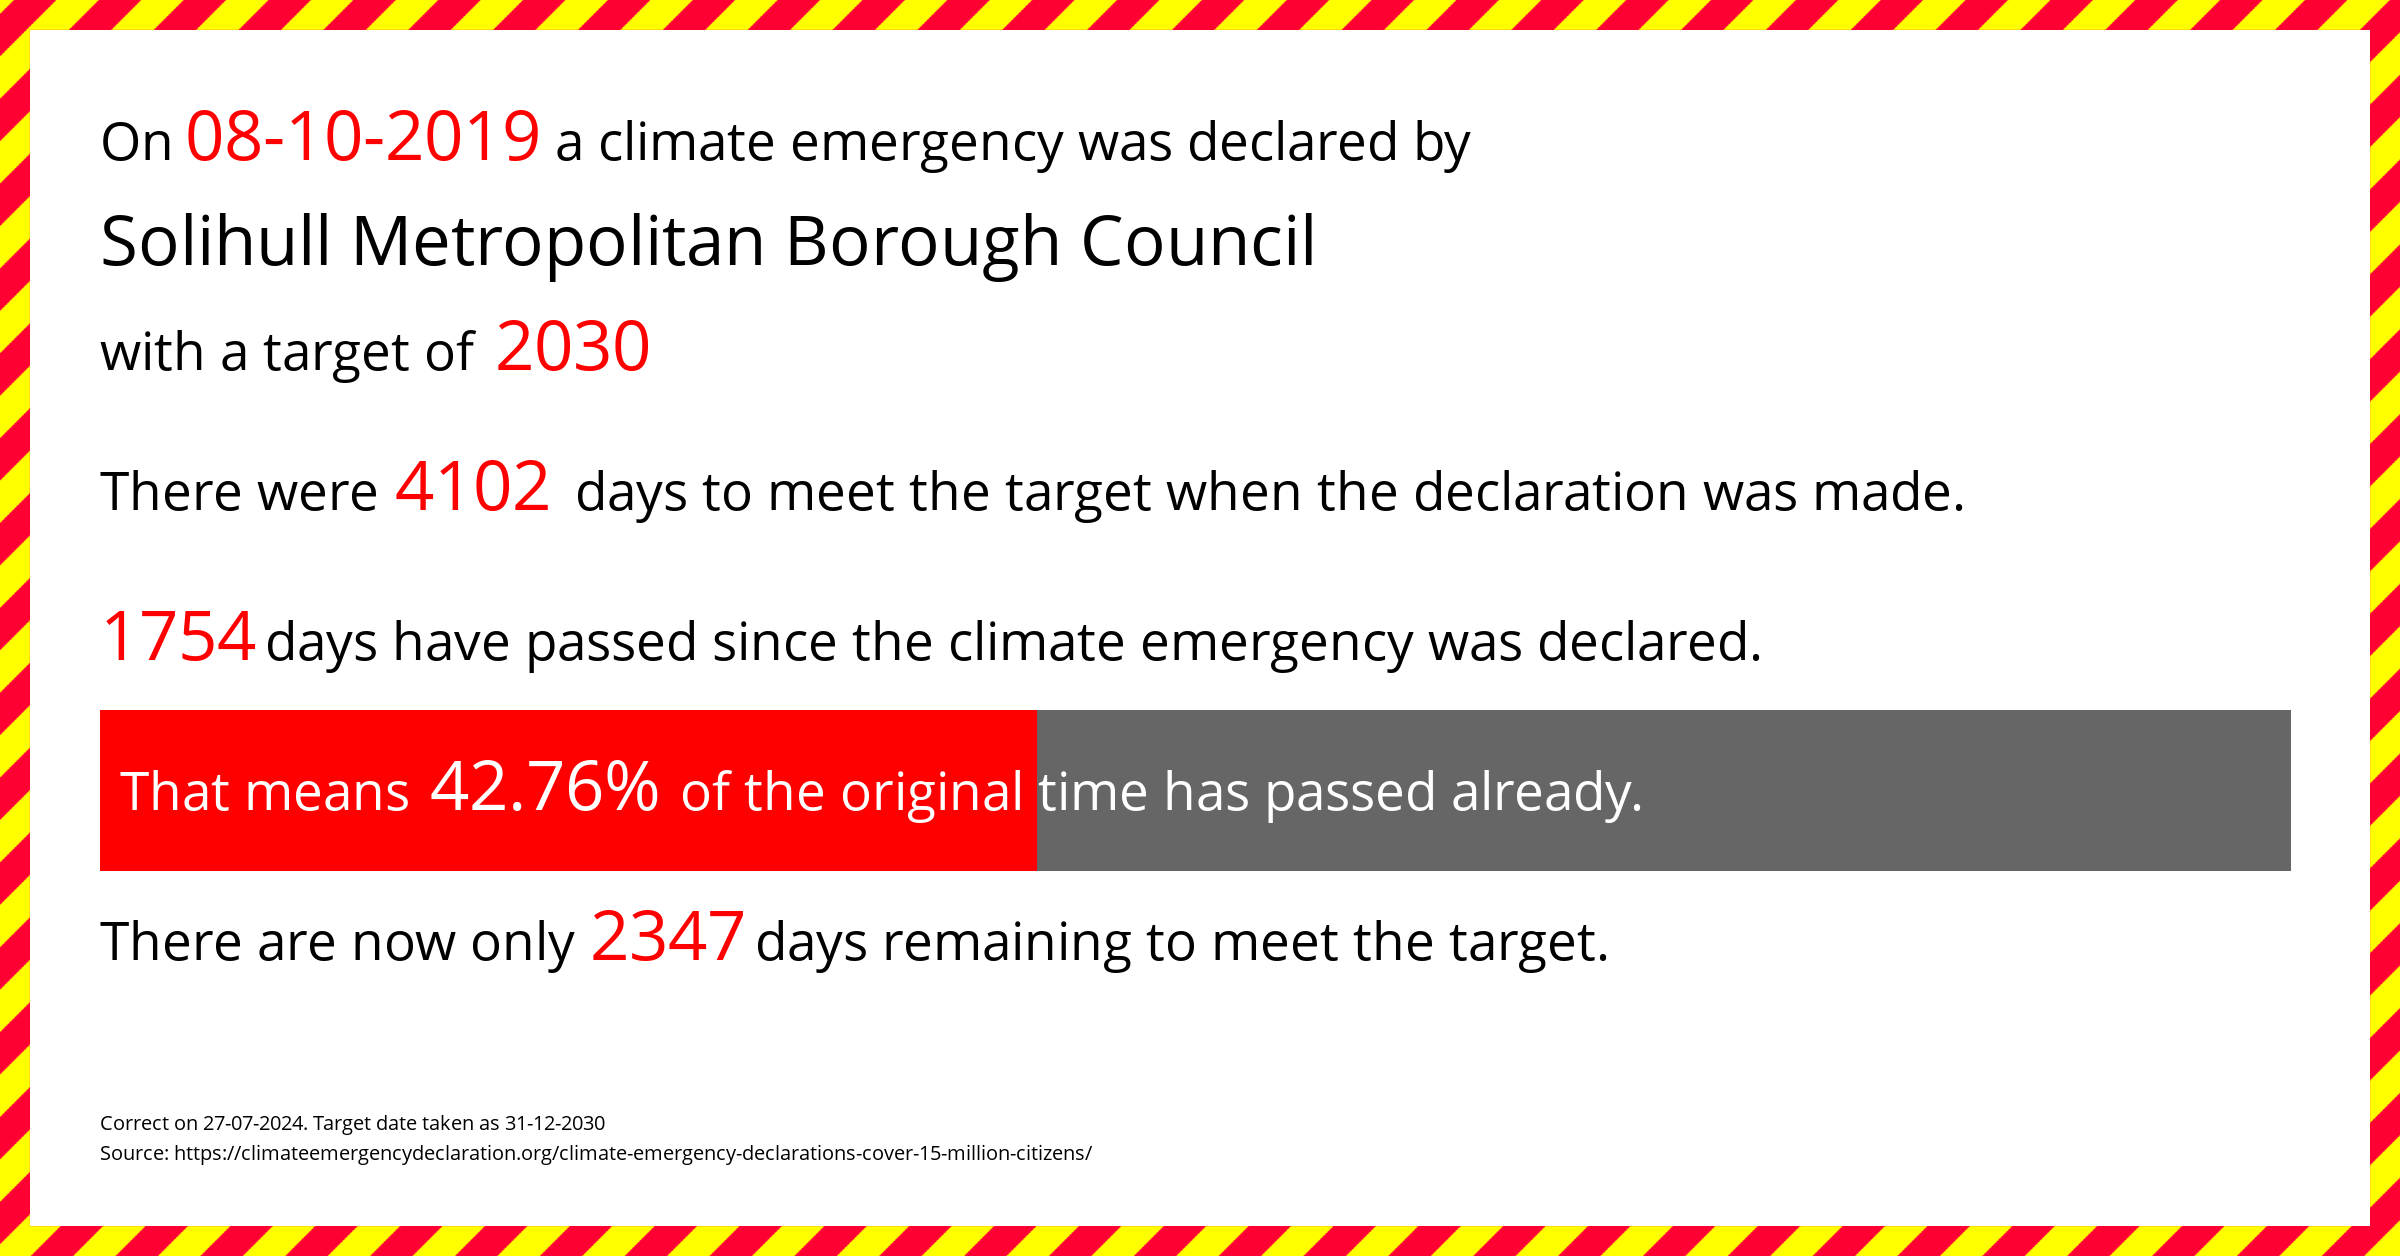 Solihull Metropolitan Borough Council  declared a Climate emergency on Tuesday 8th October 2019, with a target of 2030.